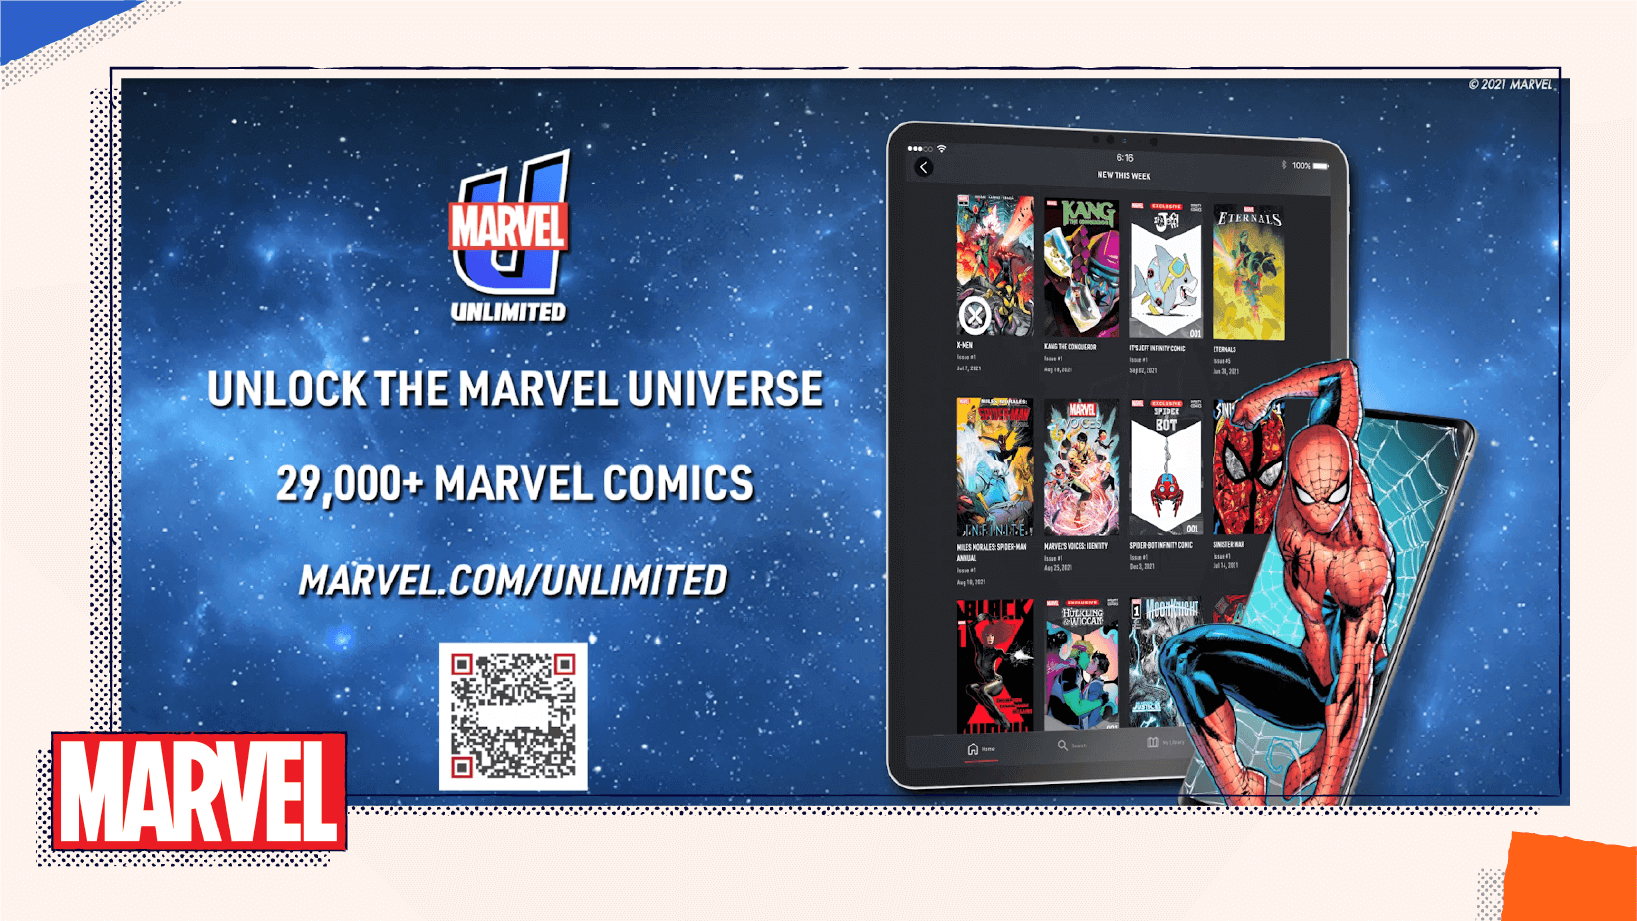 An advertisement depicting a tablet and a QR Code that can be scanned to be taken to the Marvel Unlimited comic book website.